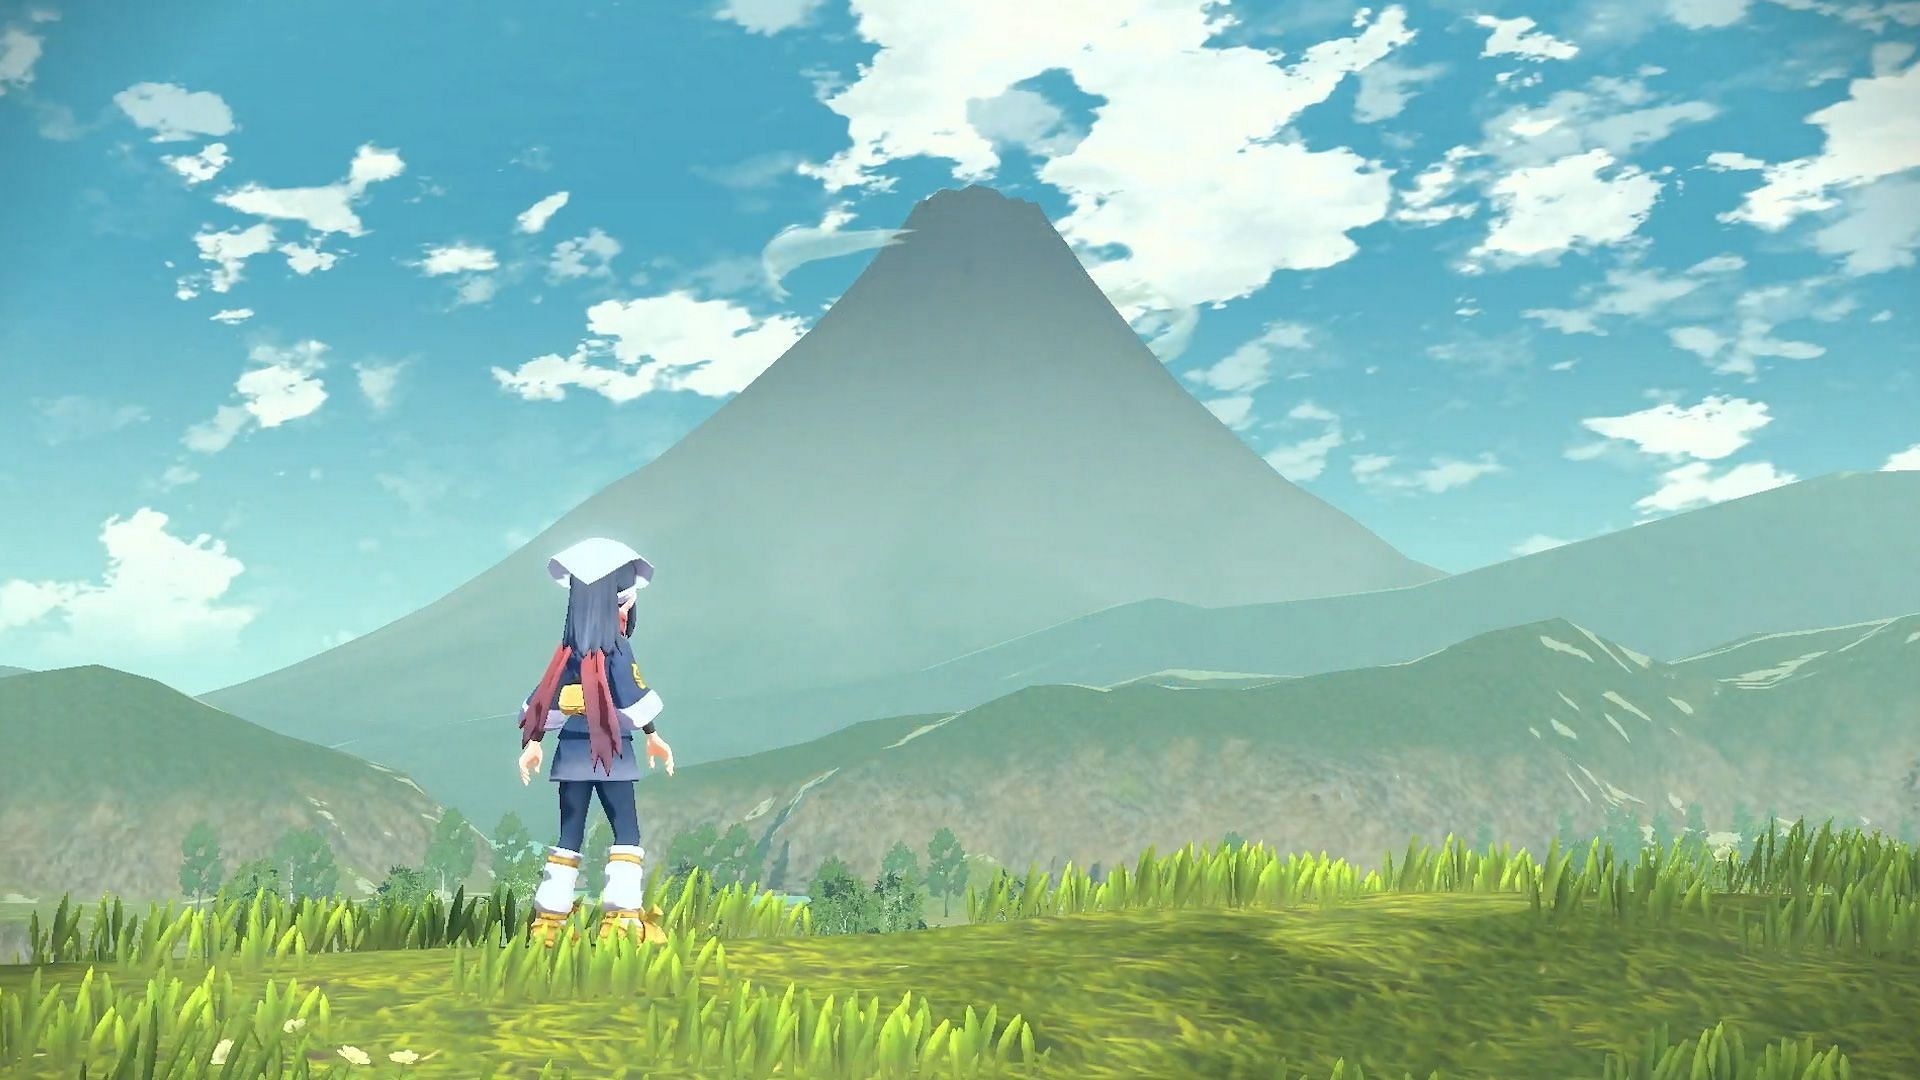 As a wise man once said: &quot;Trust in yourself, and you will find your way.&quot; (Image via Game Freak)